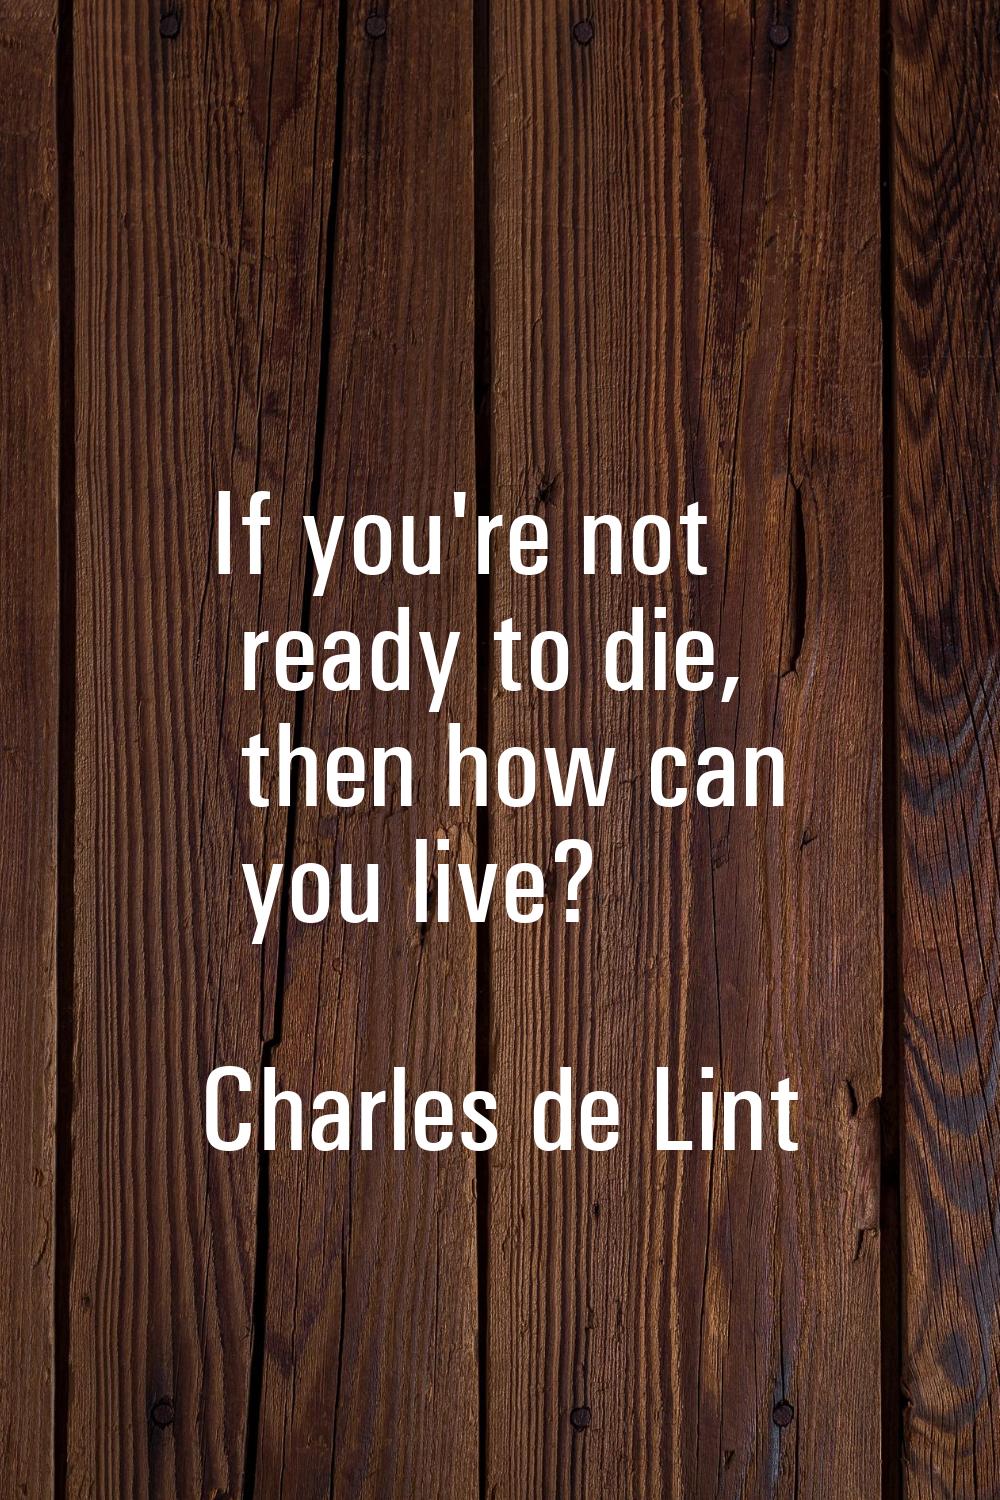 If you're not ready to die, then how can you live?